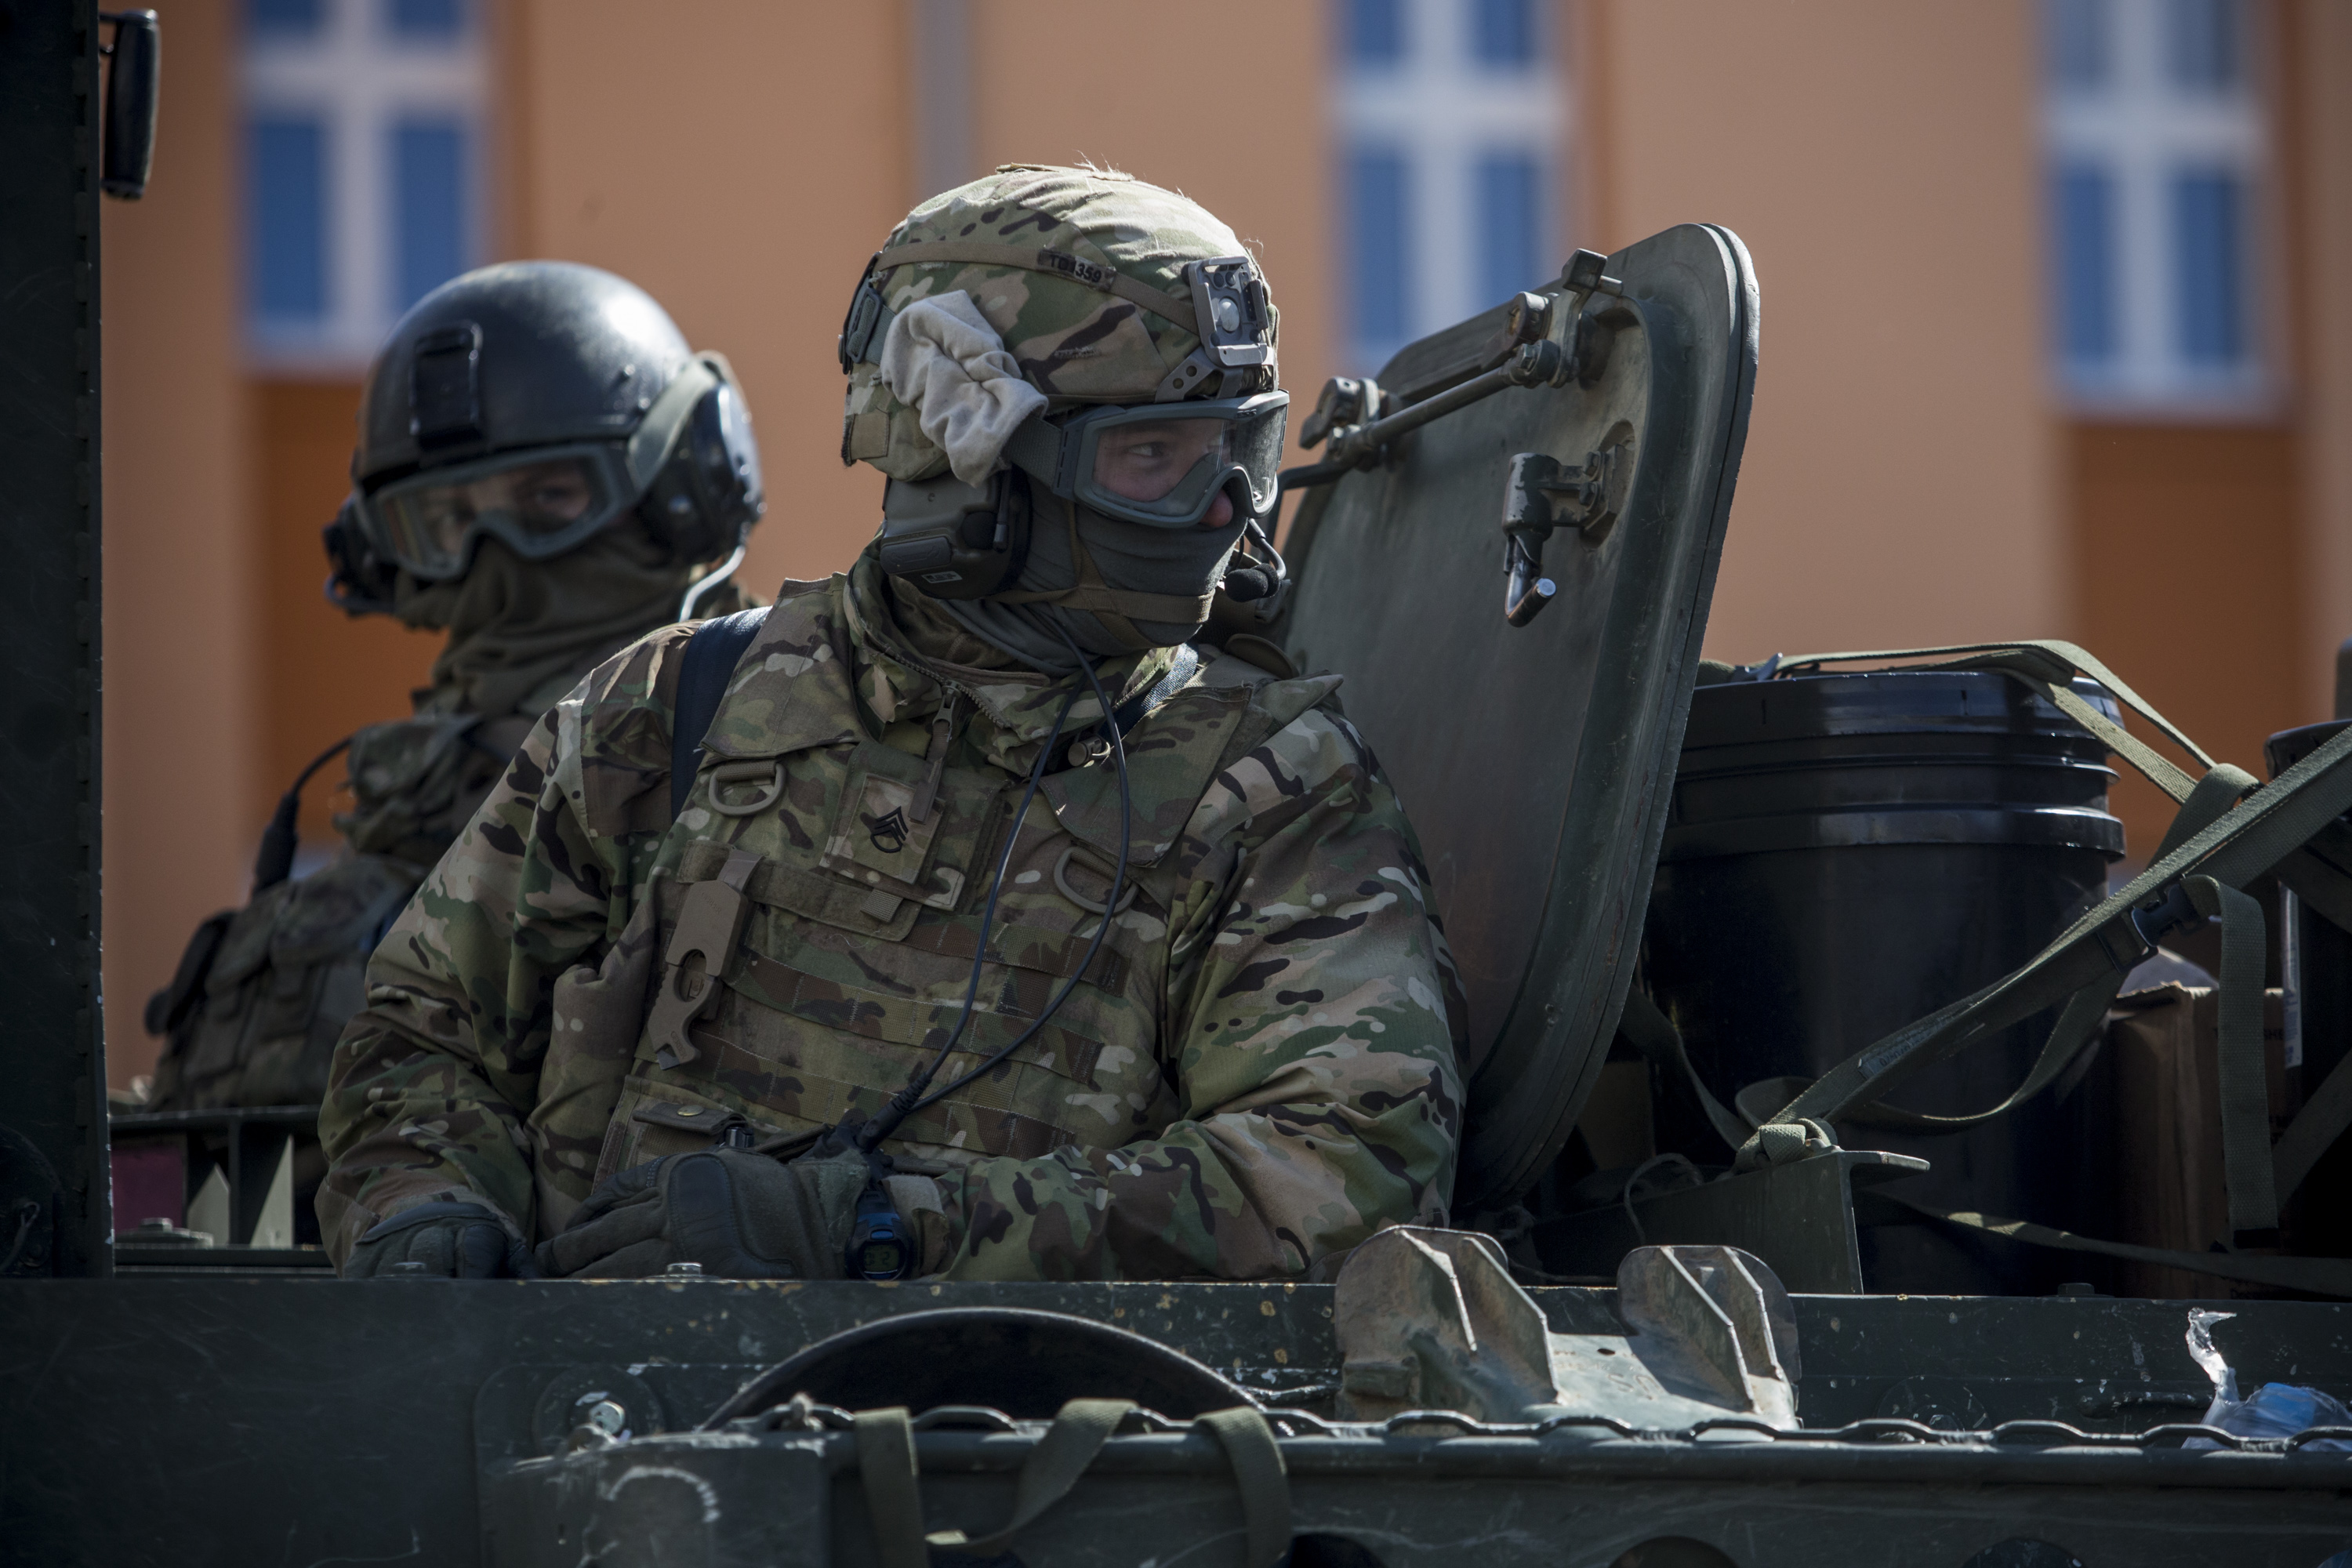 U.S. Army soldiers of the 3rd Squadron, 2nd Cavalry Regiment arrive at Czech army barracks on March 30, 2015, in Prague (Matej Divizna—Getty Images)